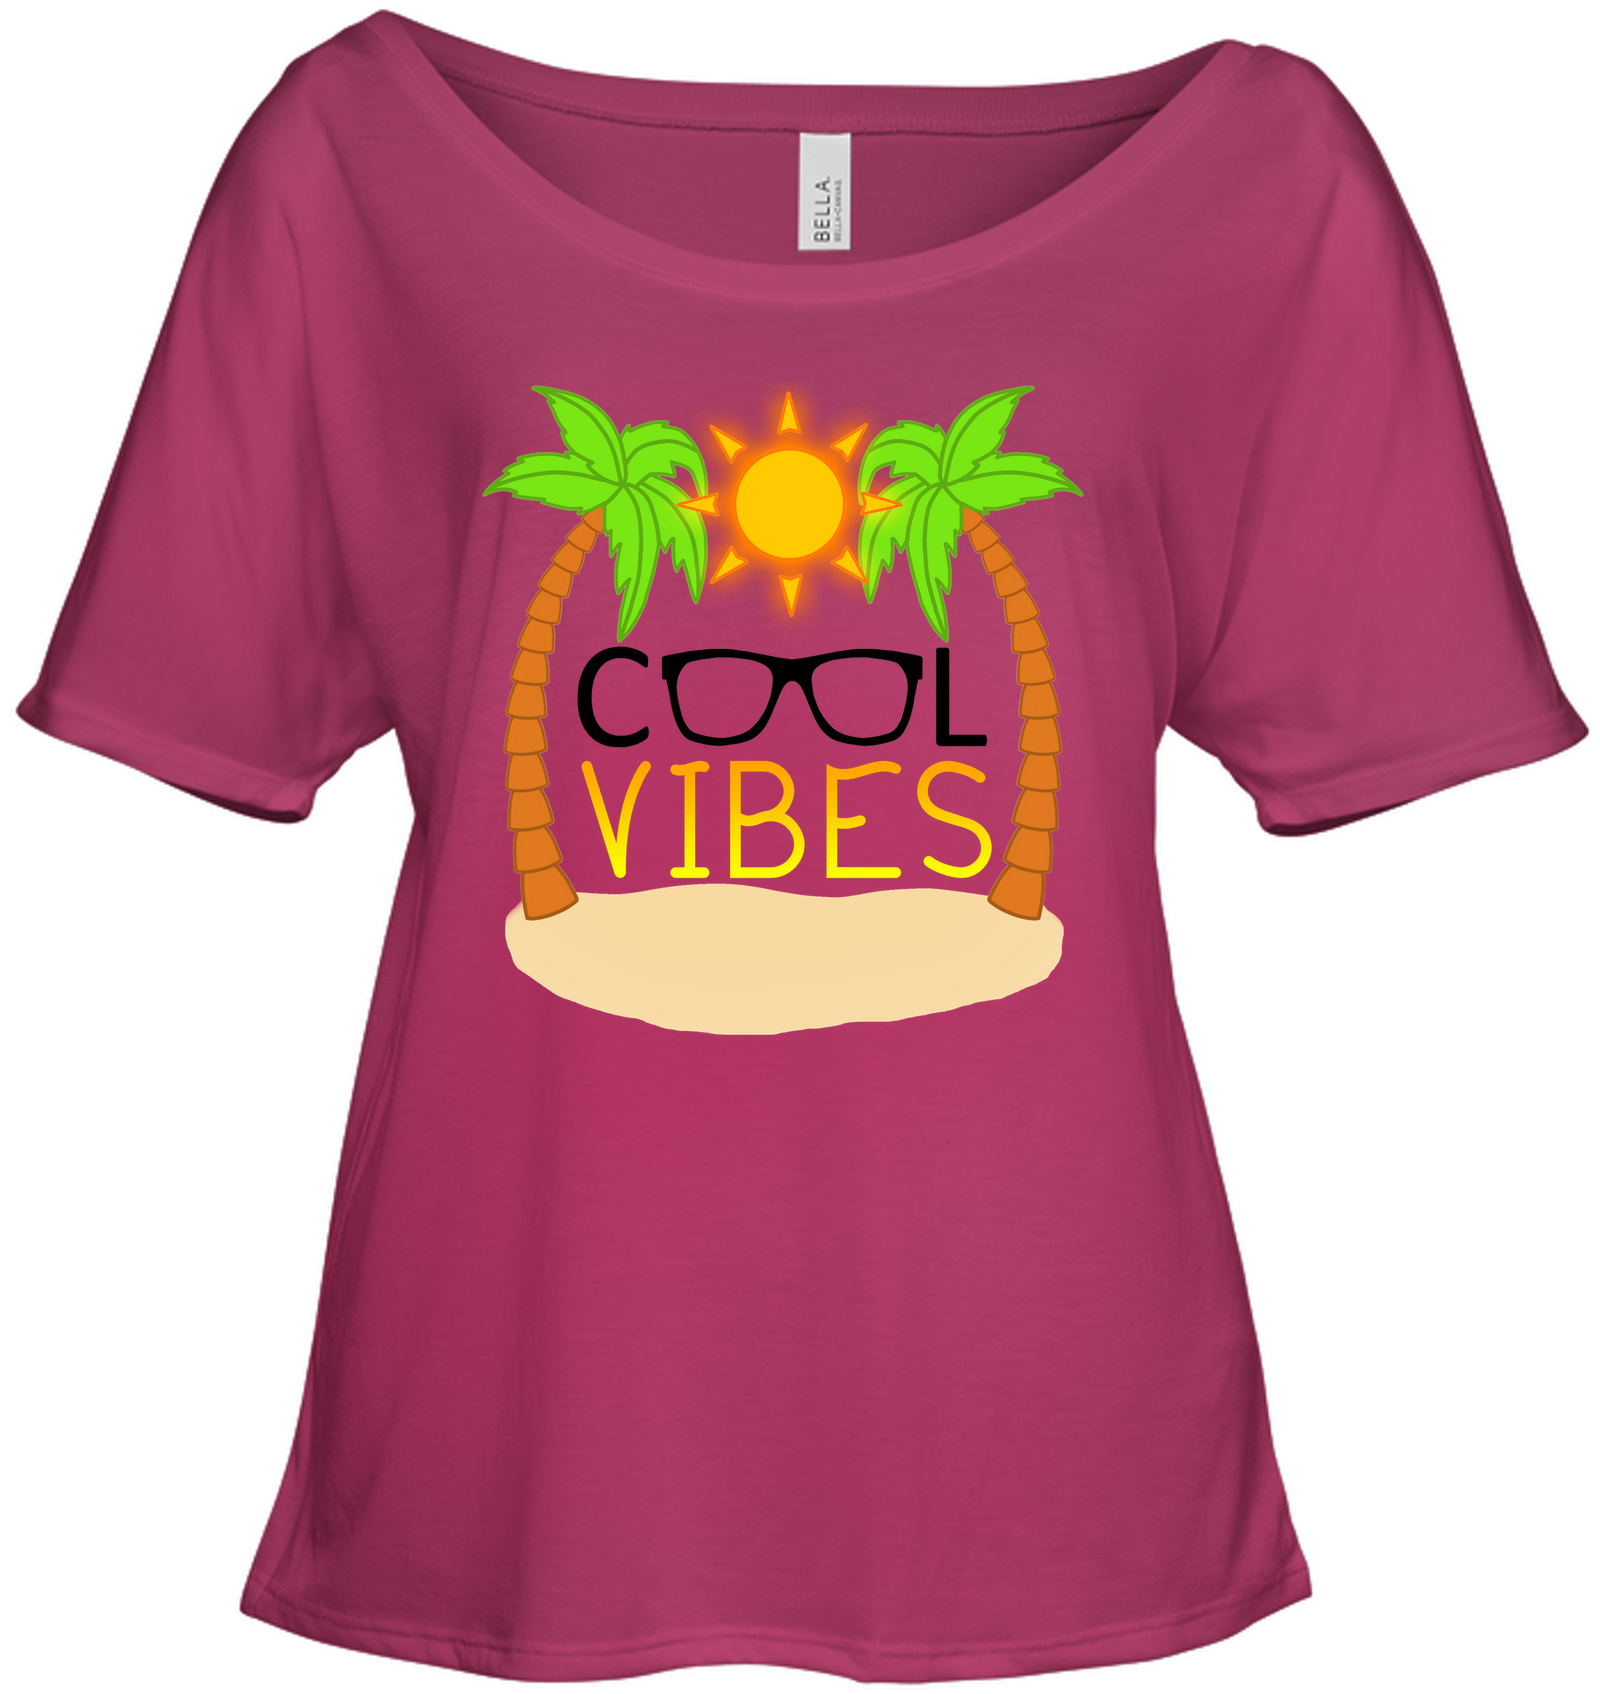 Cool Vibes - Bella + Canvas Women's Slouchy Tee